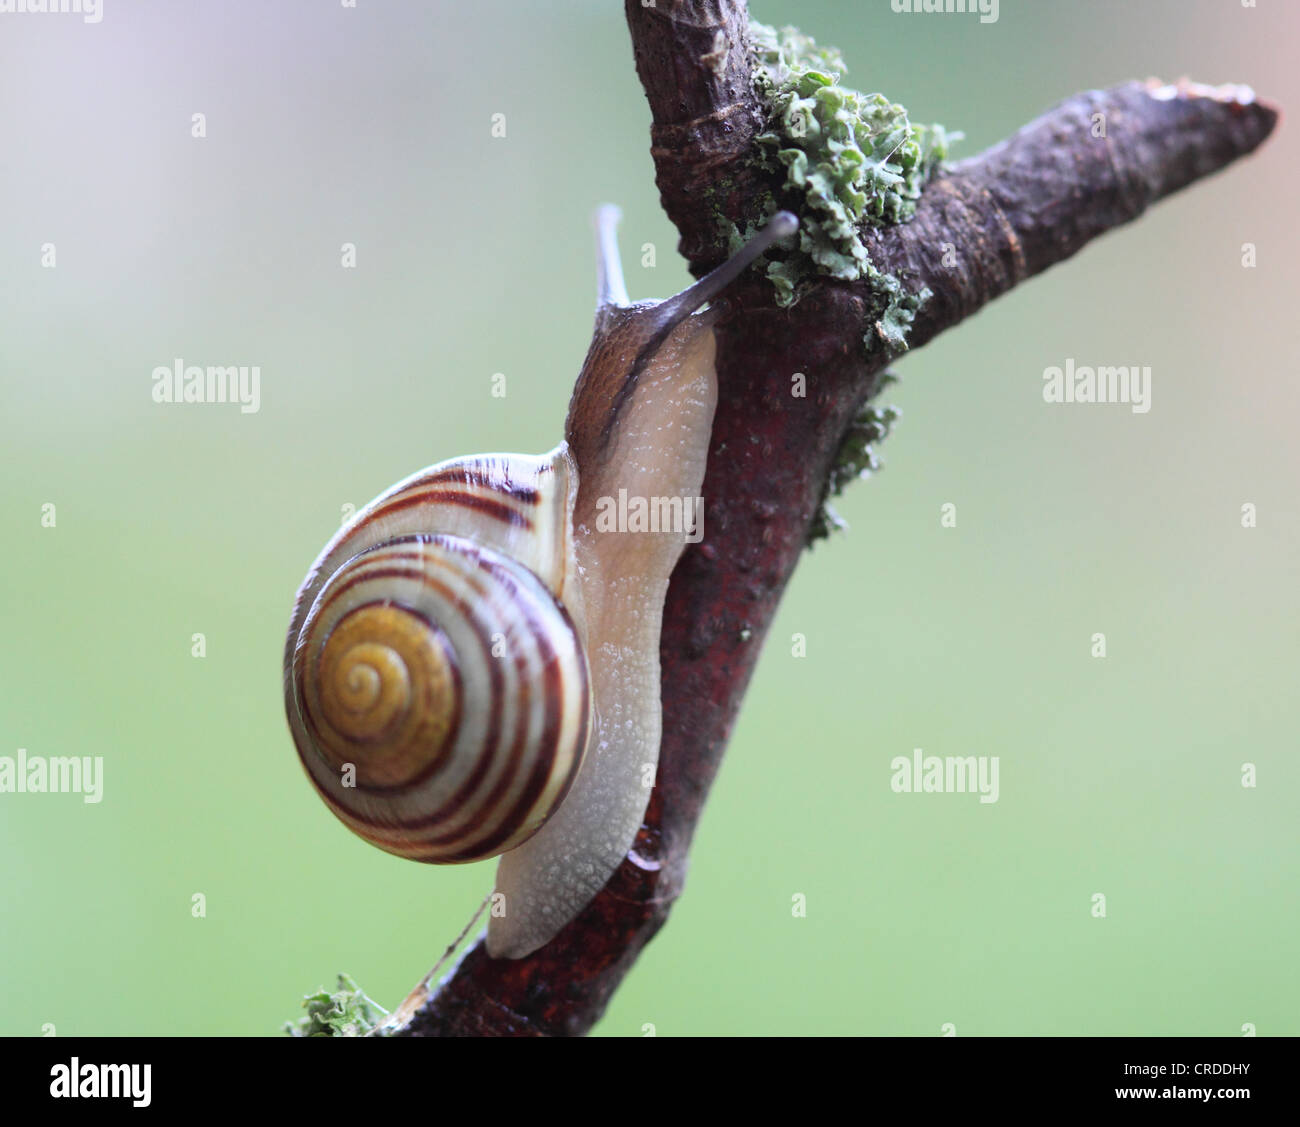 Escargot sauvage, Worcestershire, Angleterre, Europe Banque D'Images